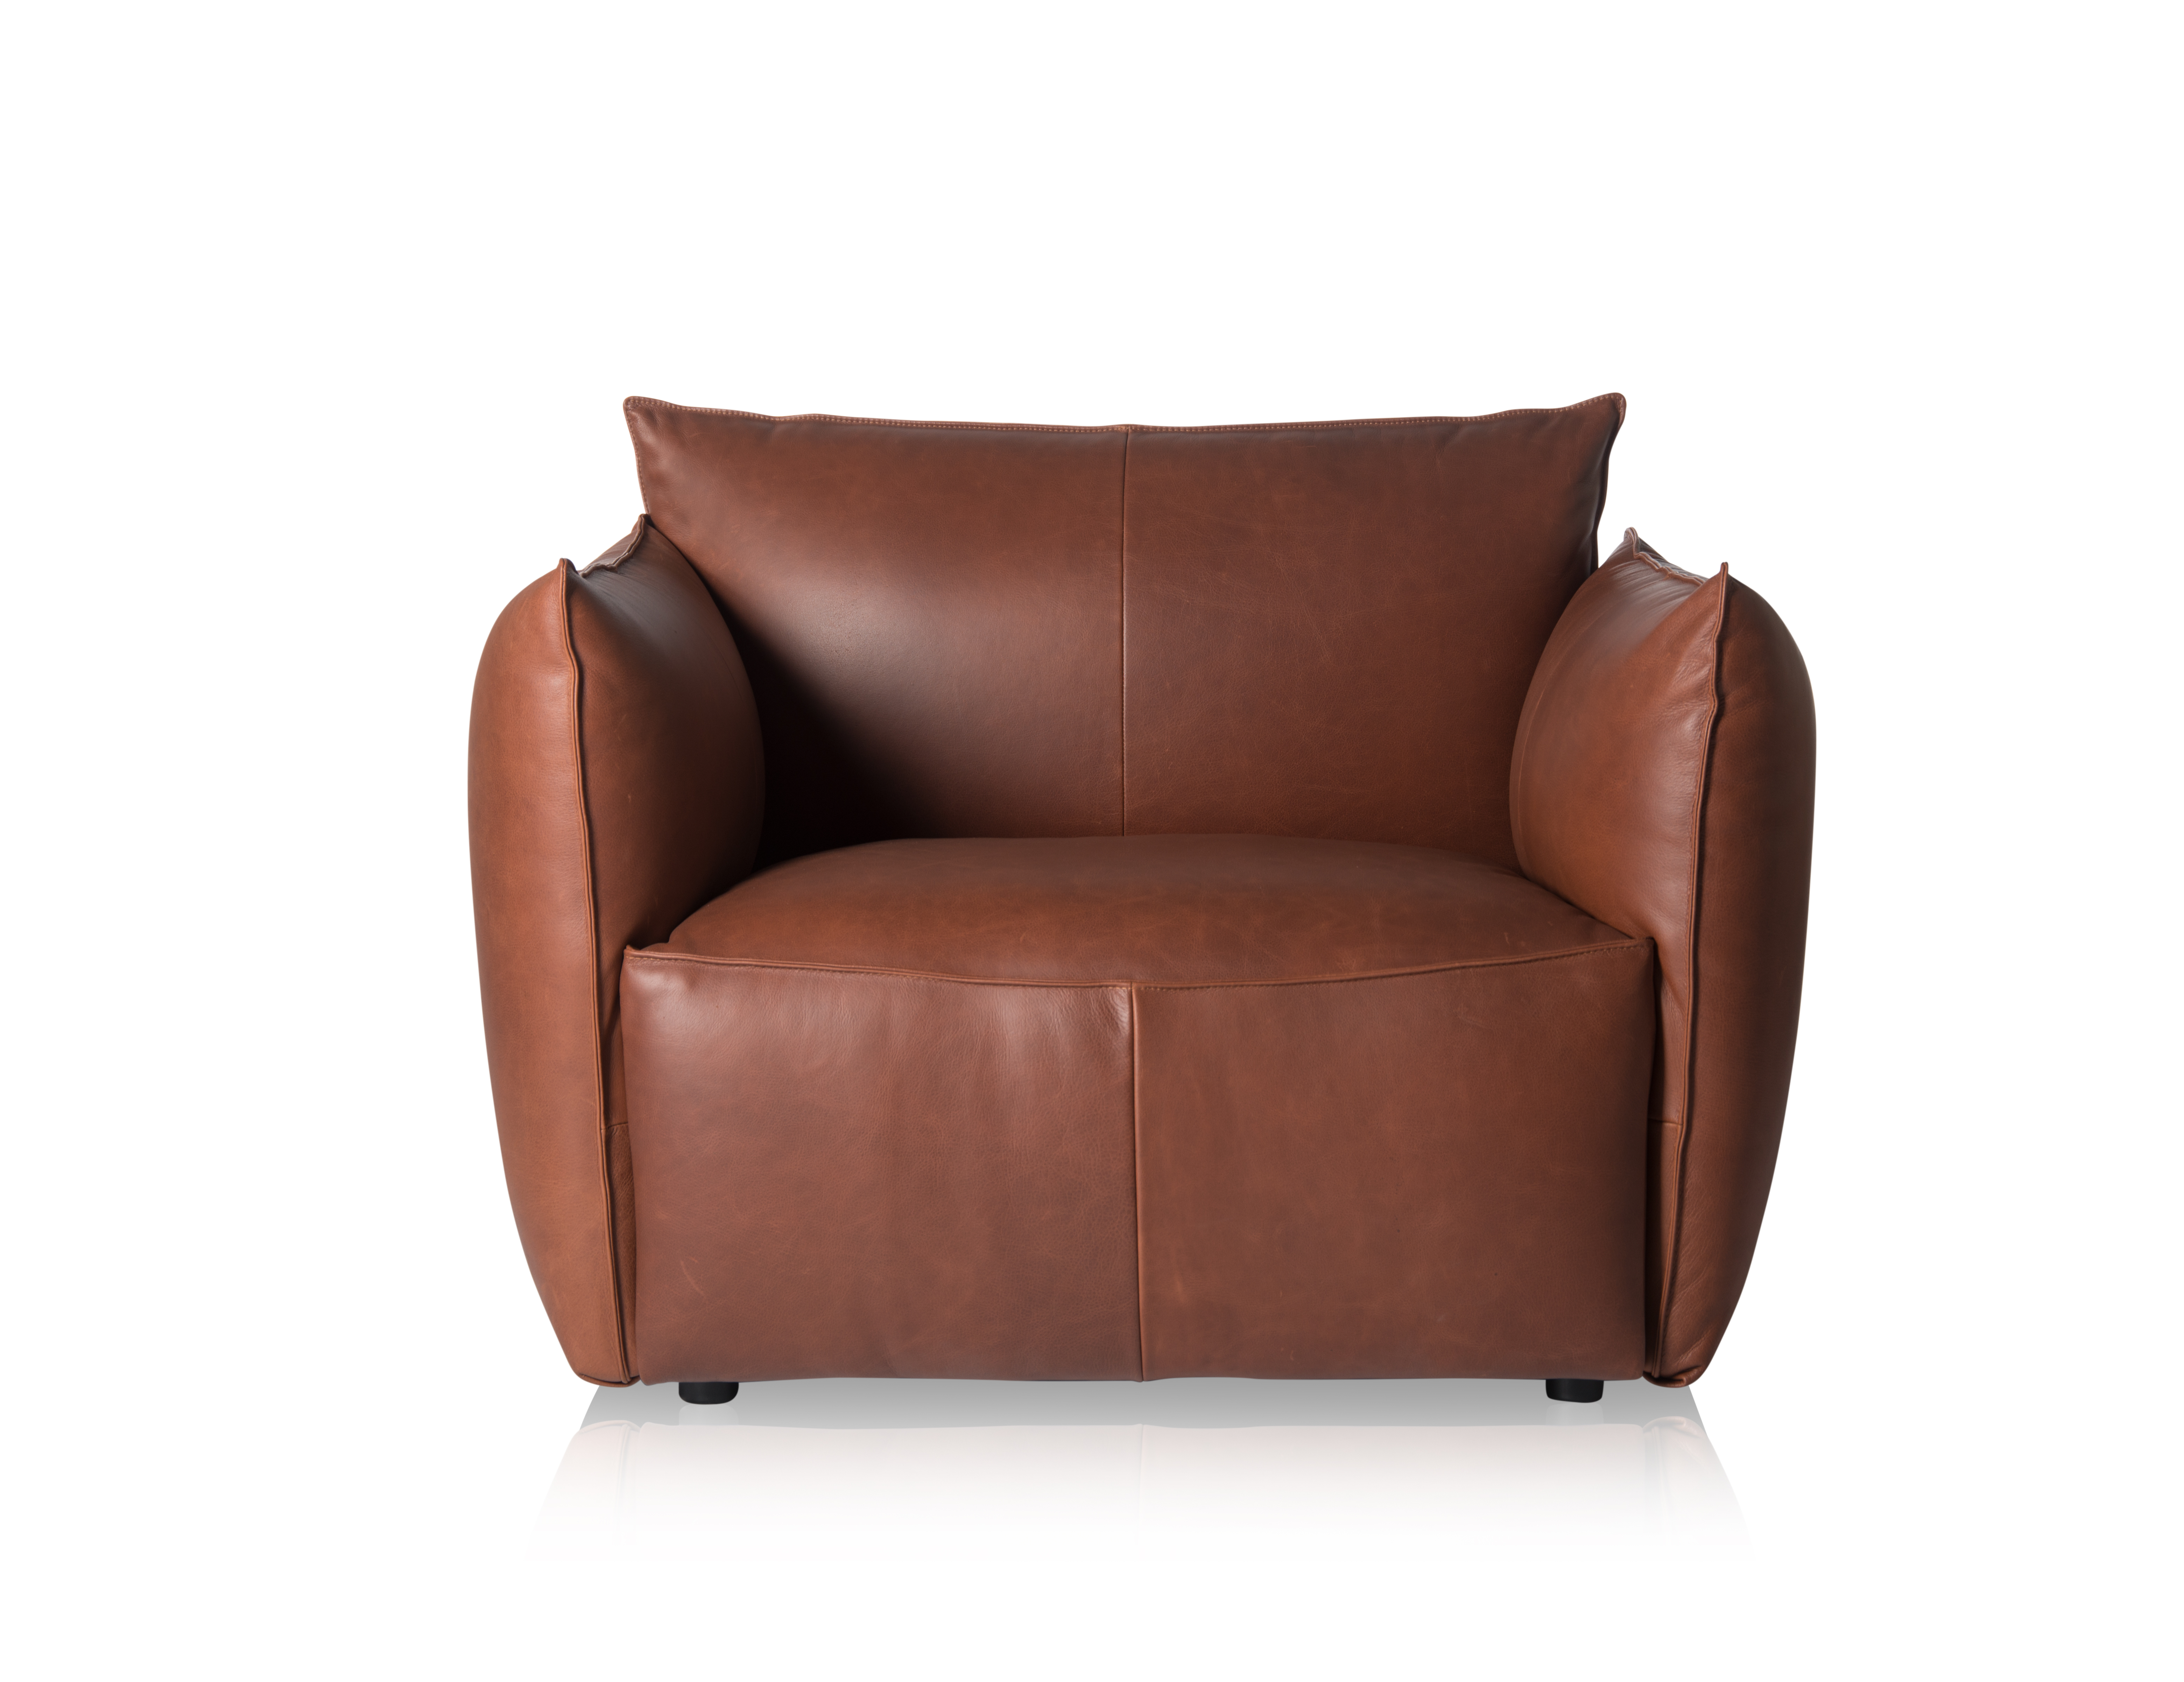 Vasa Loveseat With Low Arms Bonanza Tan Front